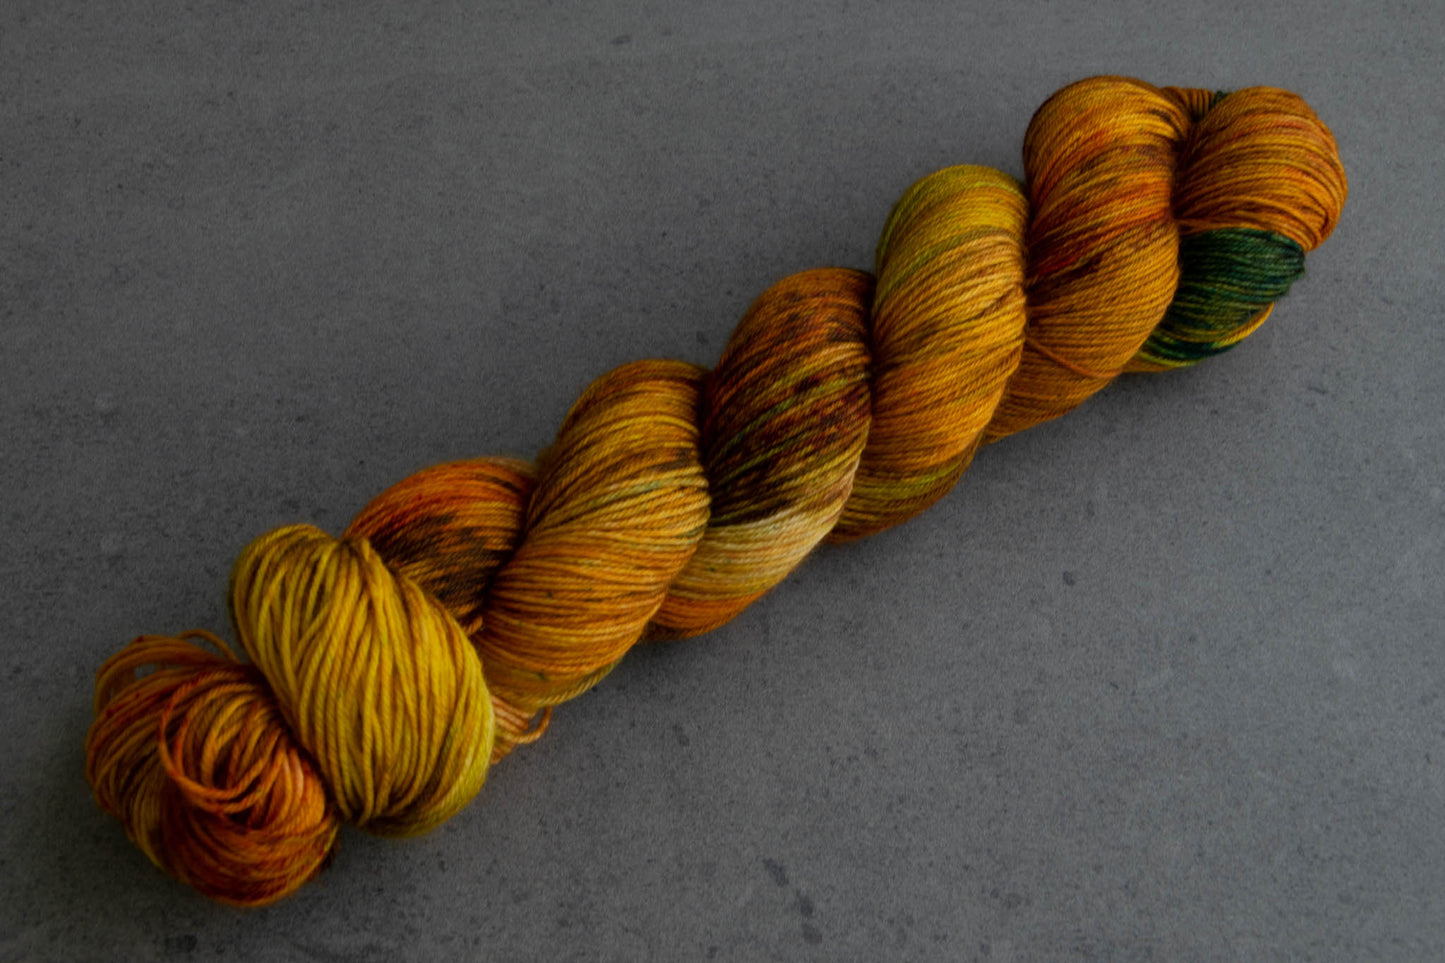 A skein of warm brown, yellow, orange, and green hand-dyed wool yarn.